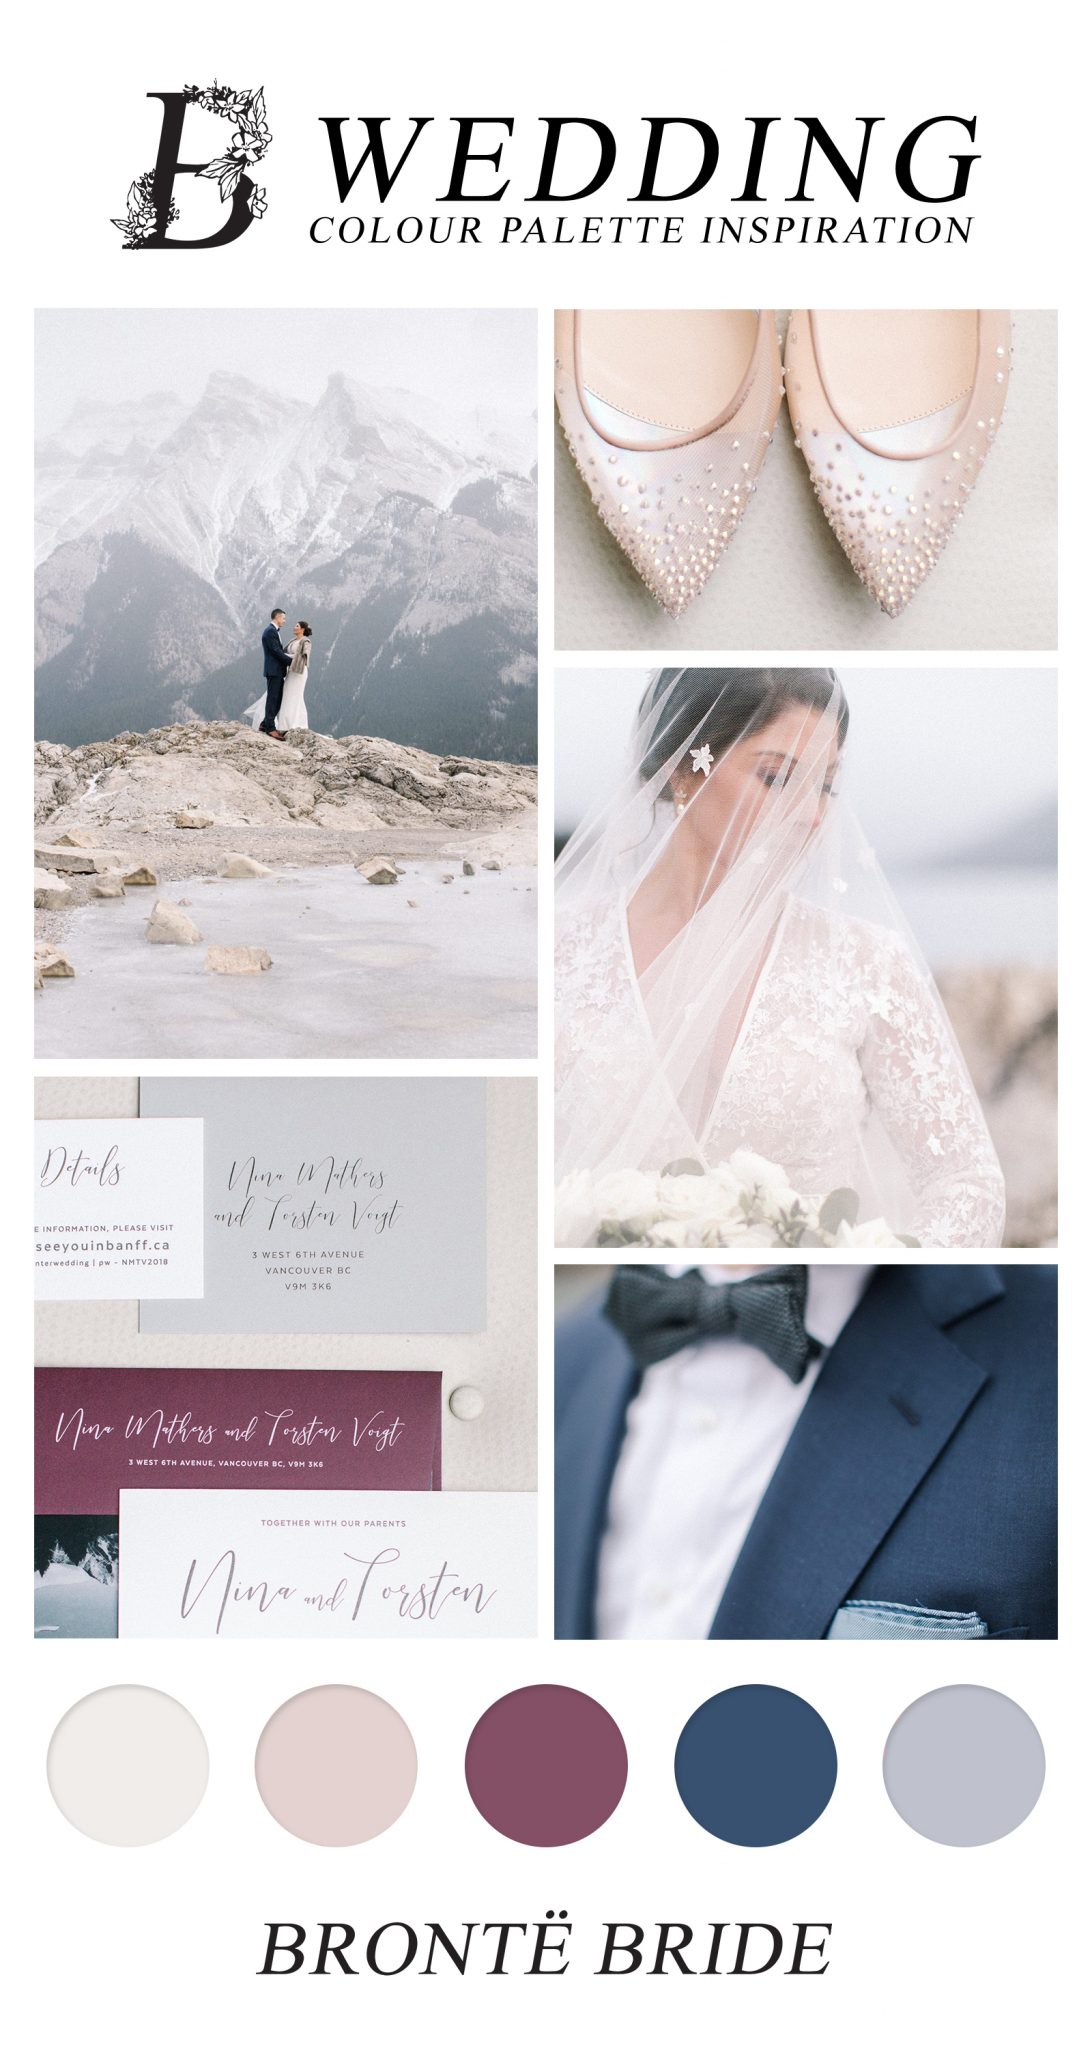 Modern Wedding Colour Palette Inspiration - Classic Elegance at Banff Springs Hotel, navy suit, rocky mountain portraits